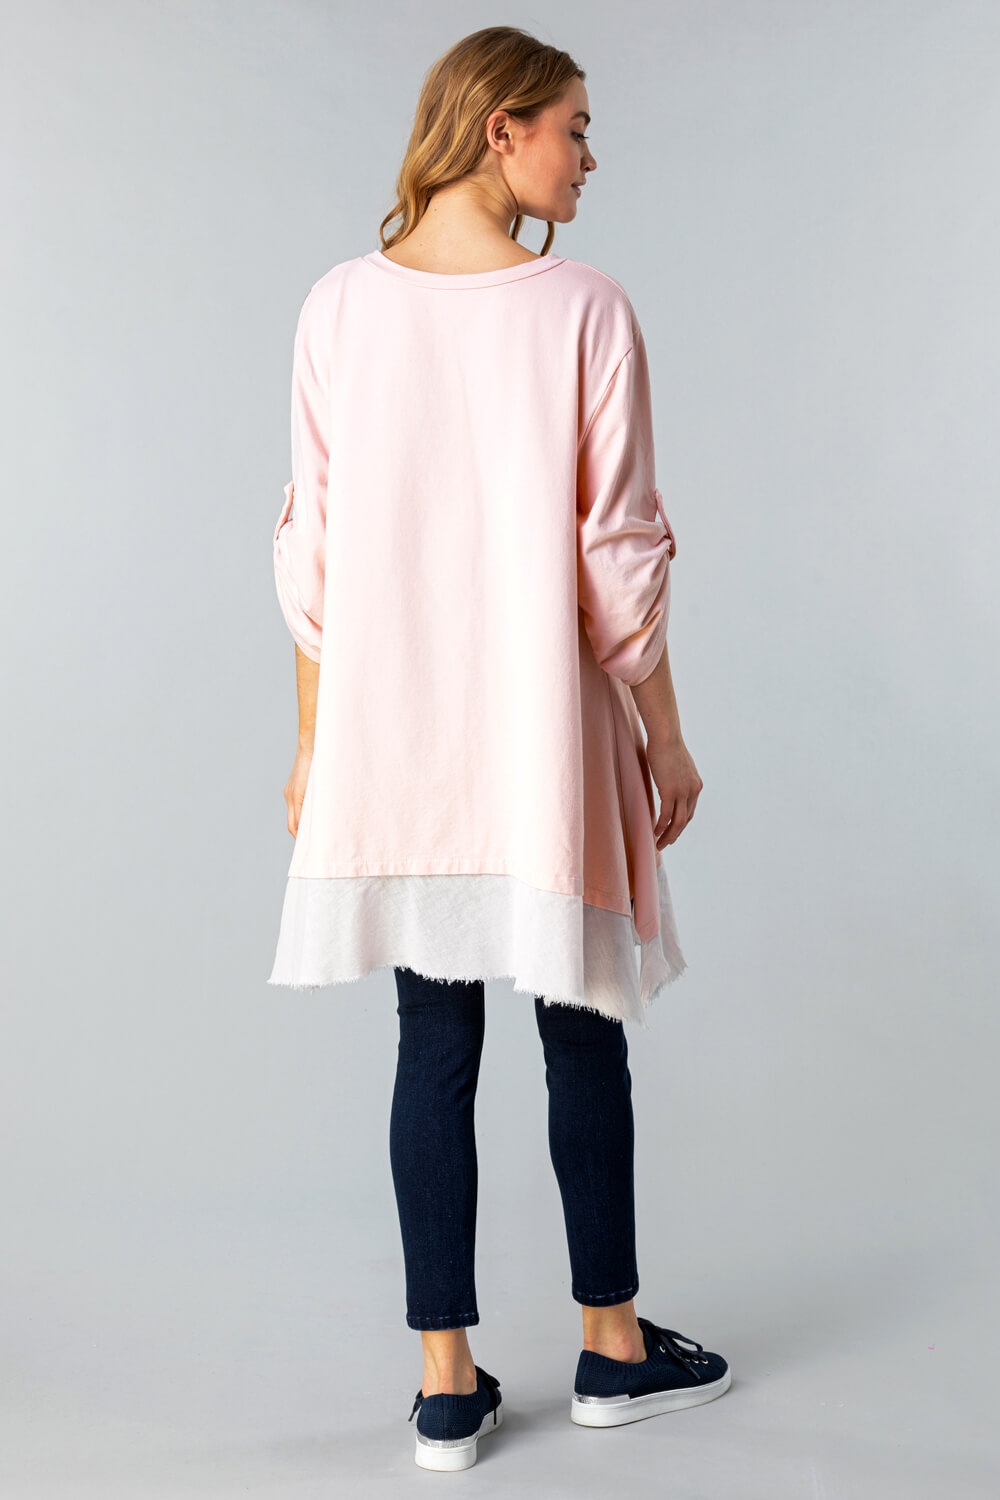 PINK Floral Slouchy Pocket Tunic Top, Image 2 of 4